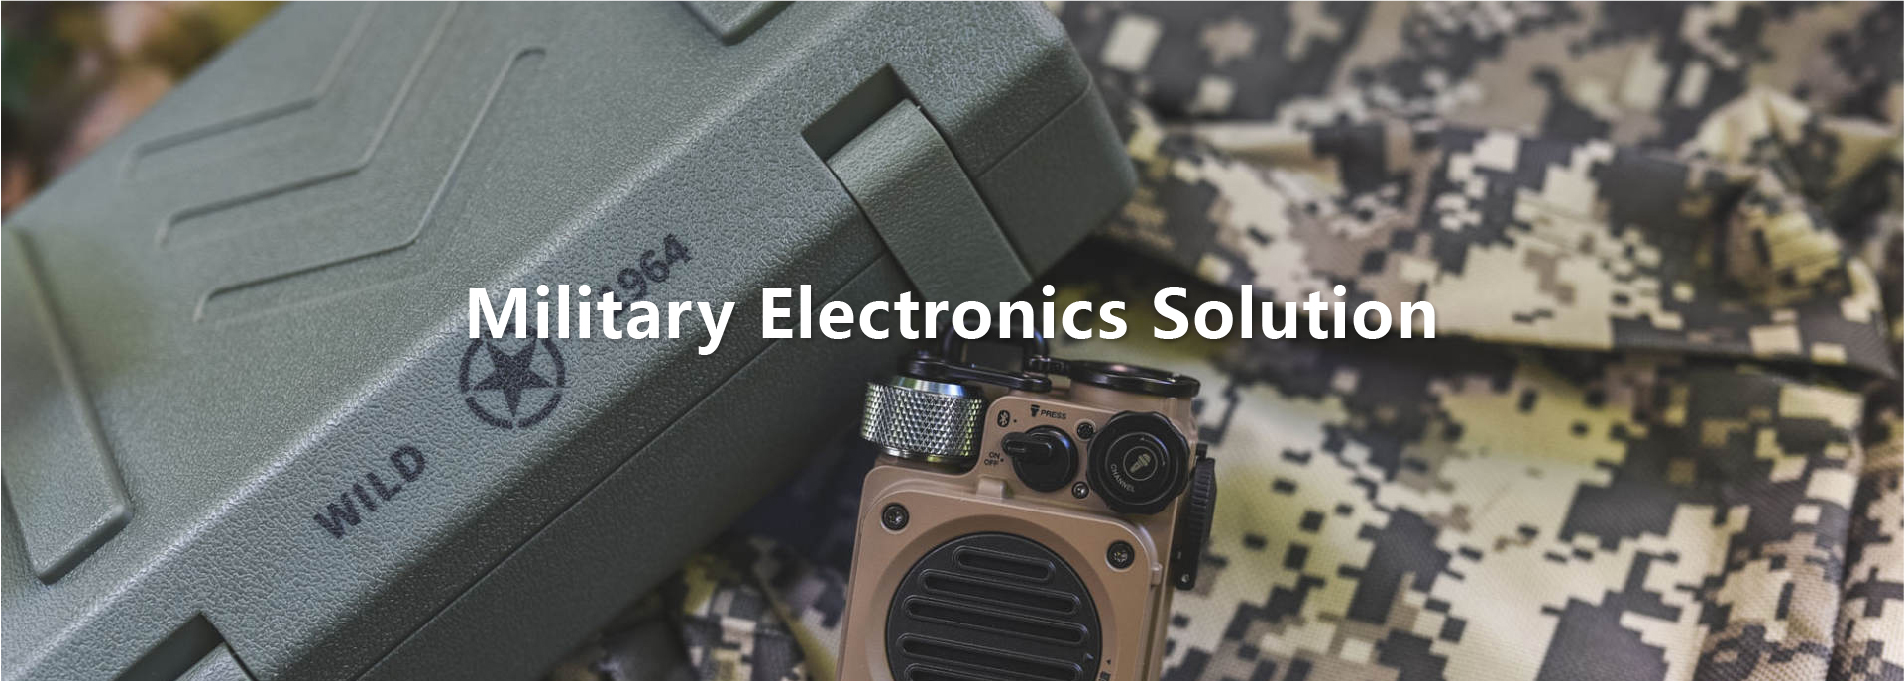 Military Electronics Solution